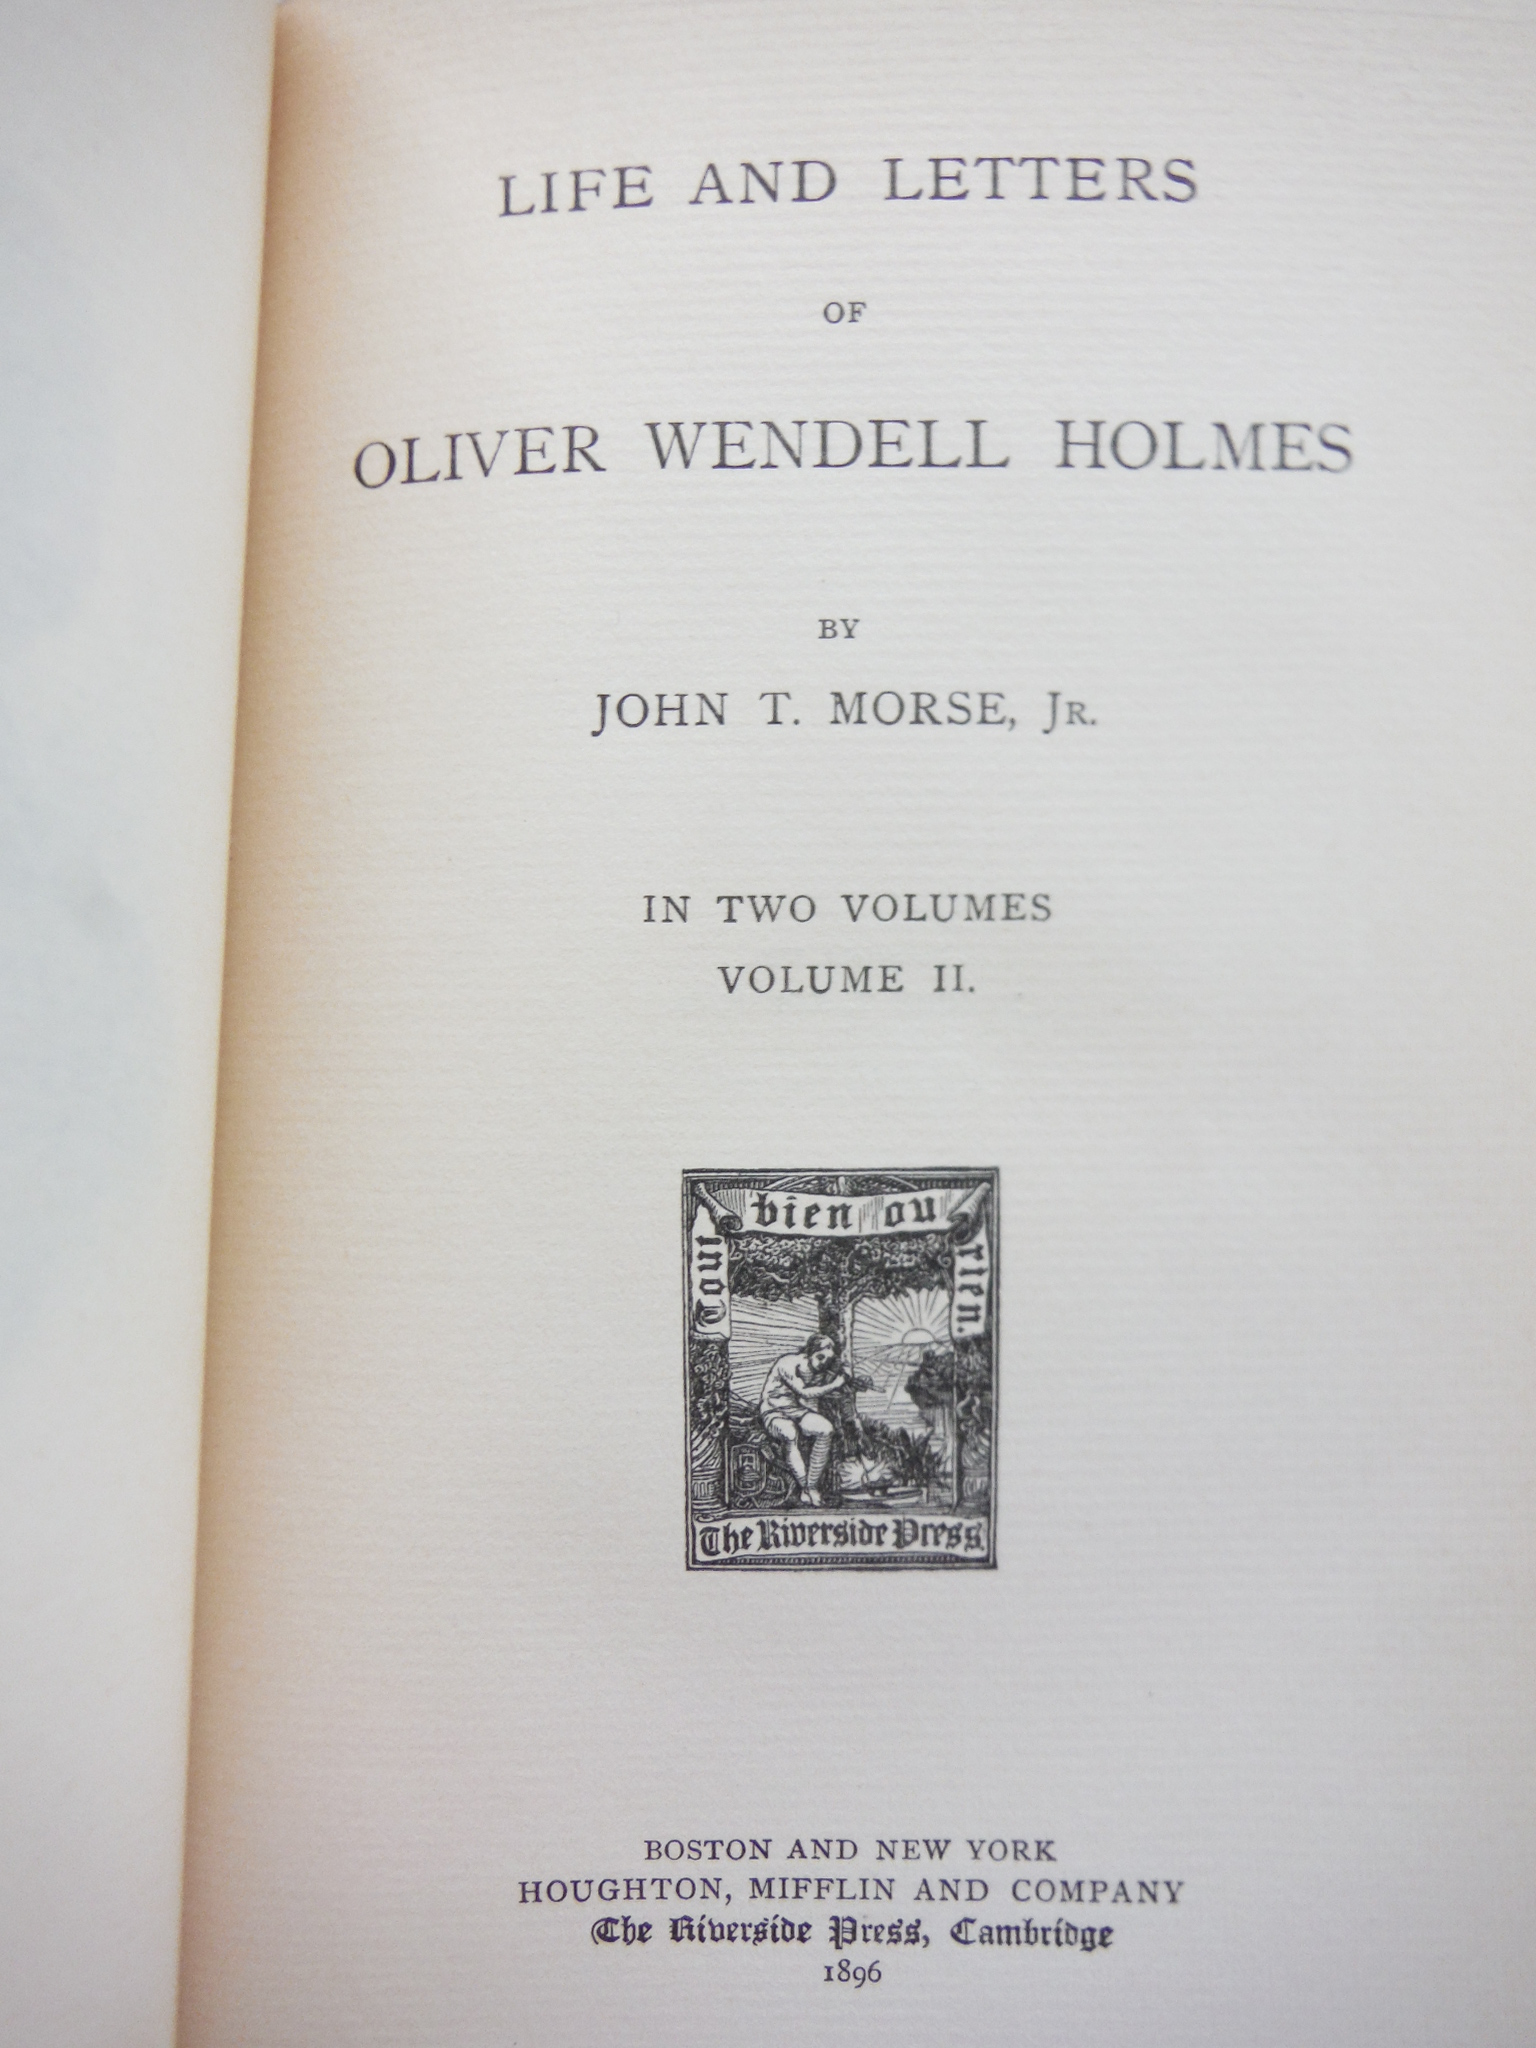 Image 3 of LIFE AND LETTERS OF OLIVER WENDELL HOLMES. 2 Volume Set.